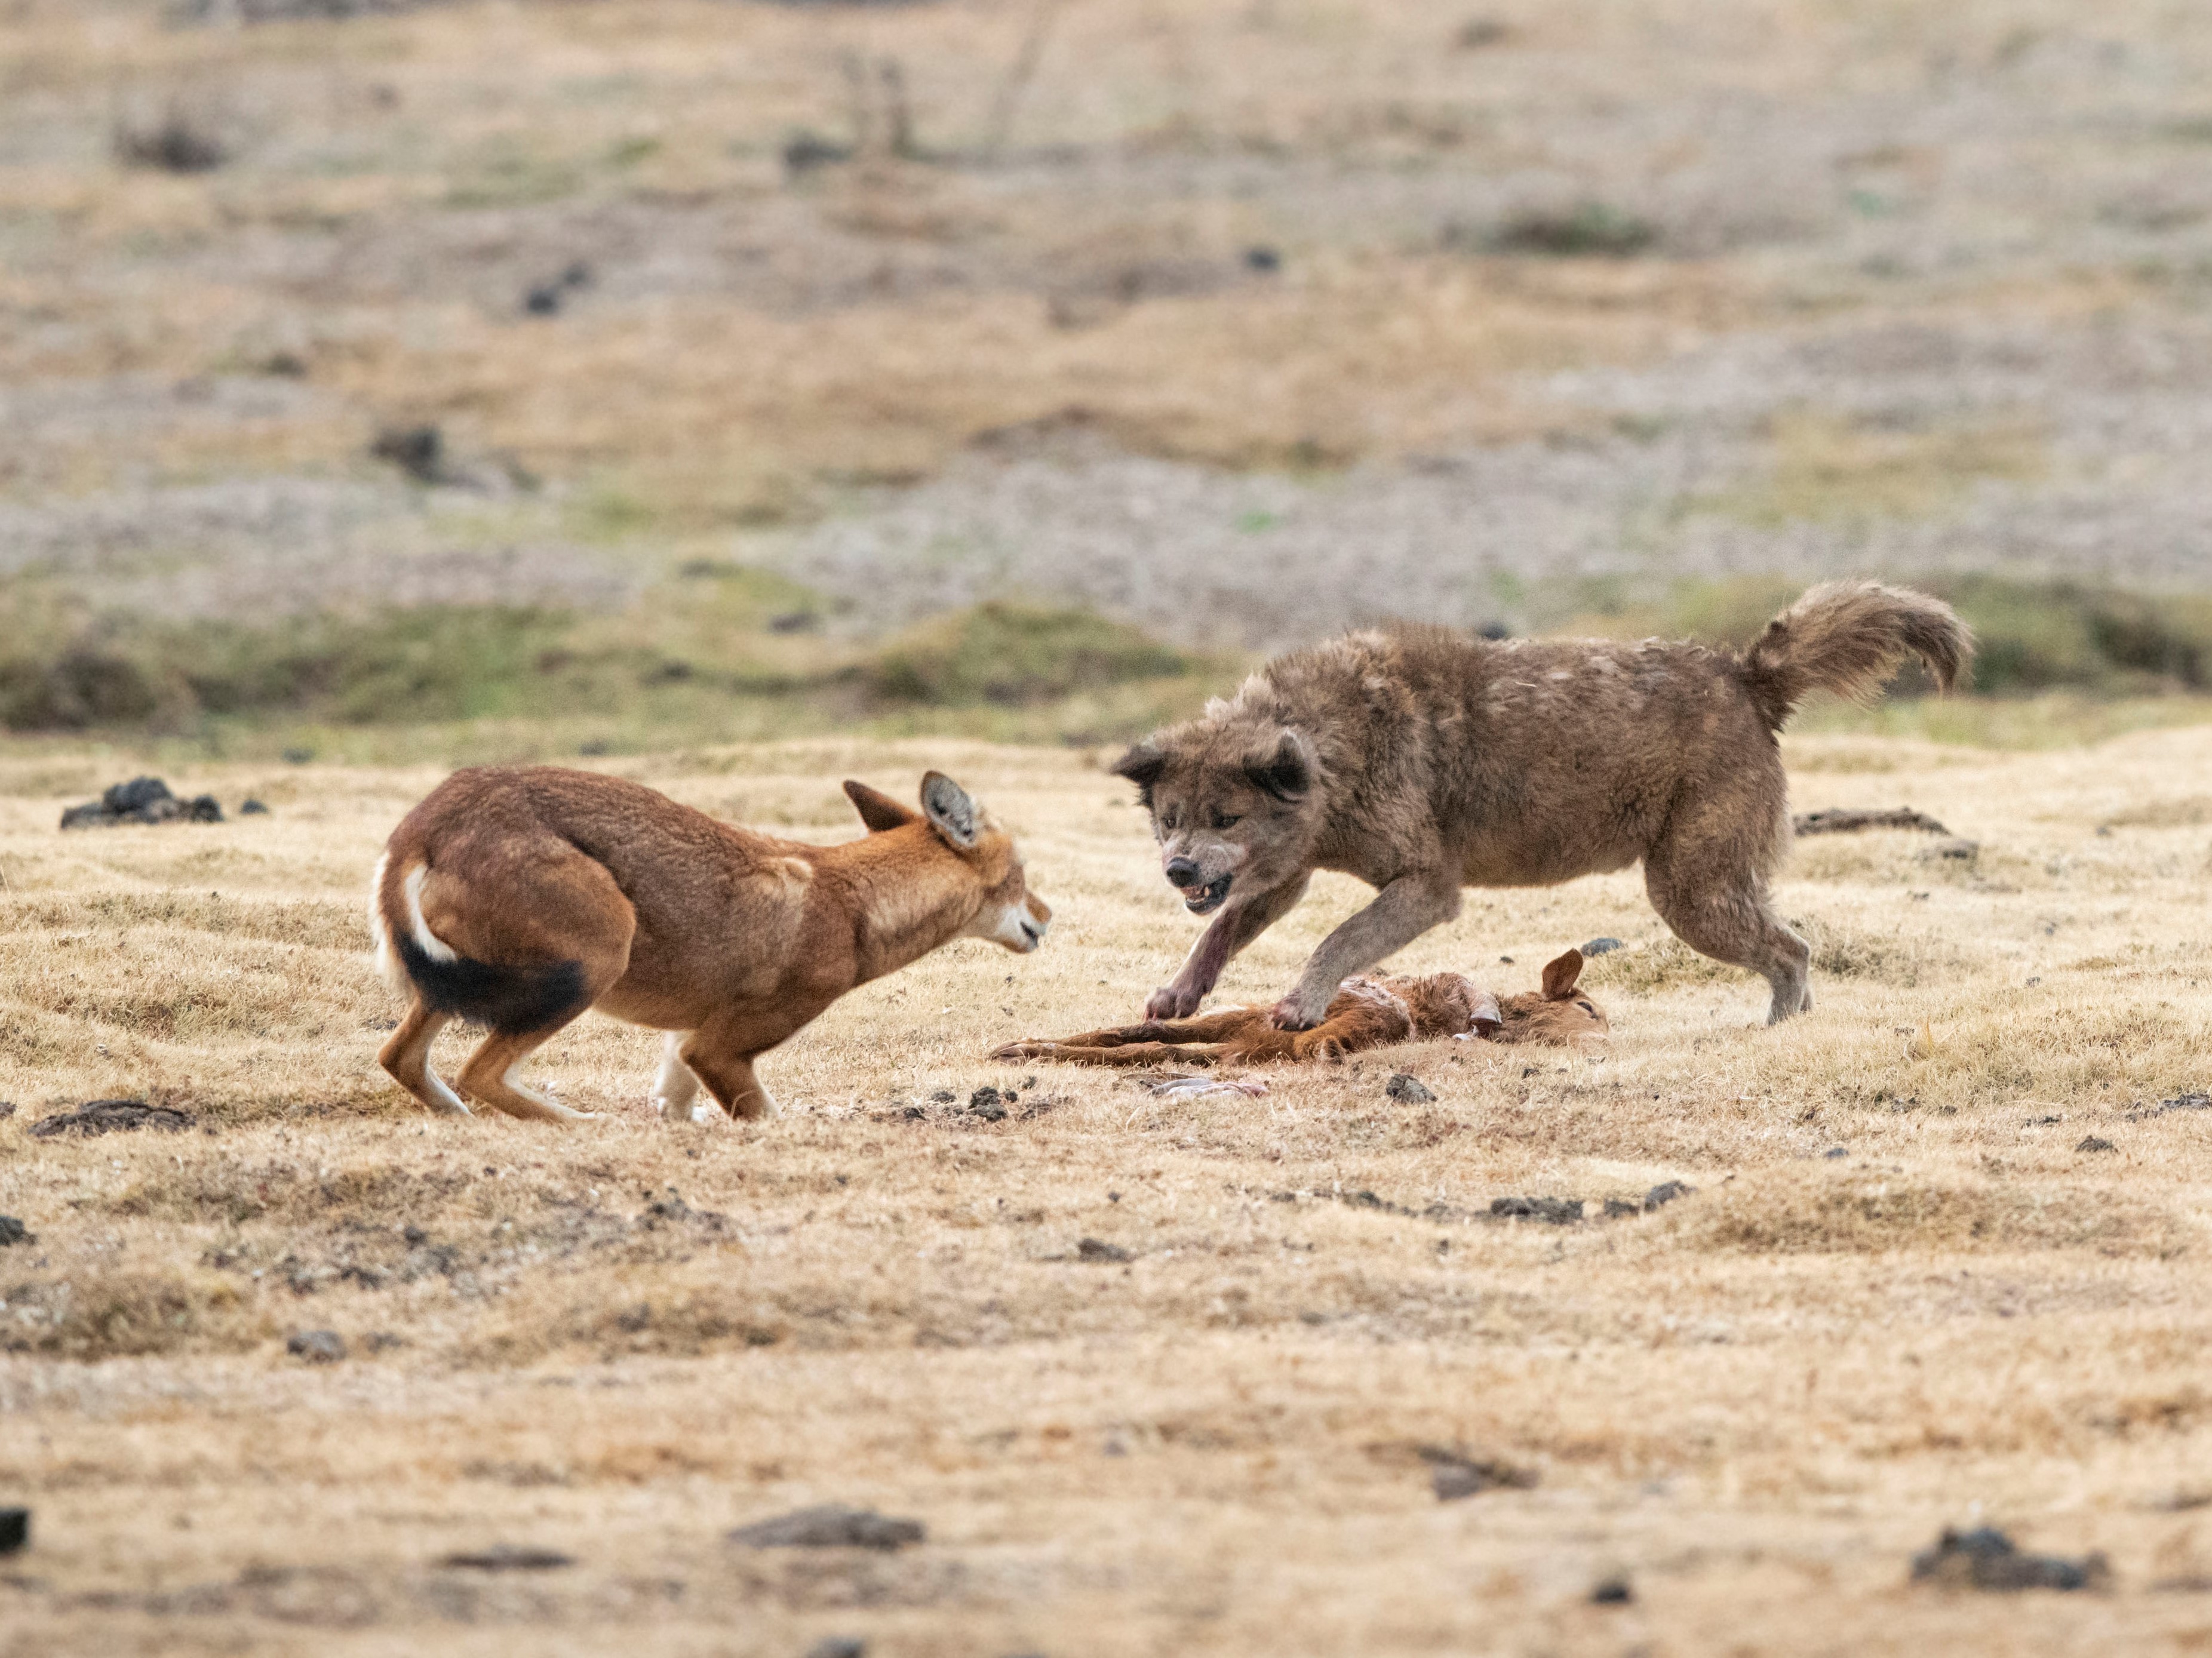 Domestic dog snarls at an Ethiopian wolf